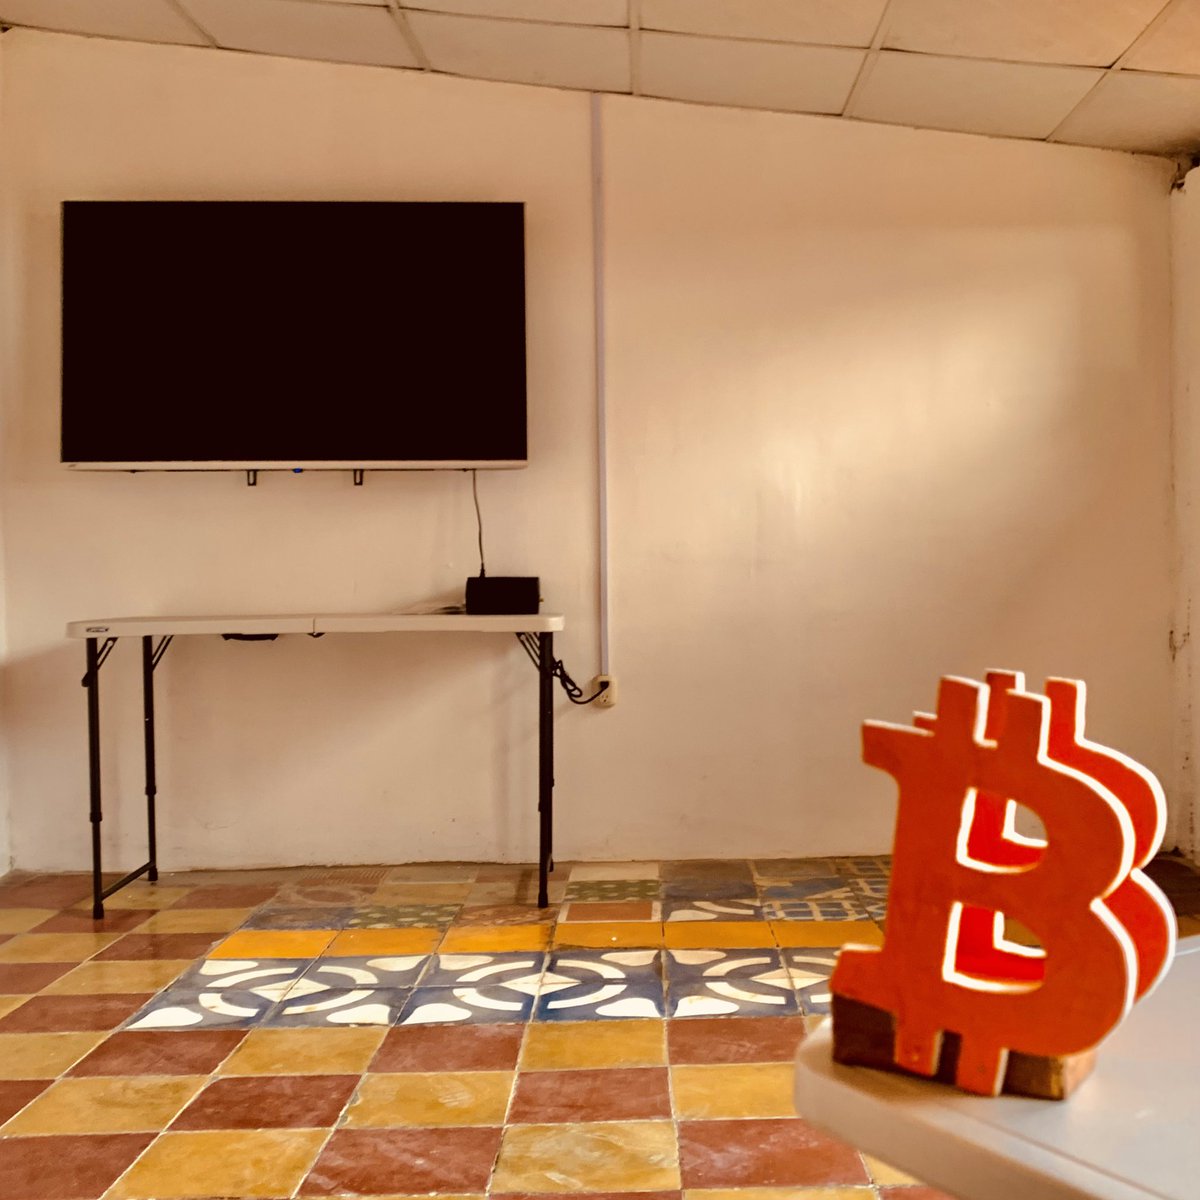 More upgrades in our humble orange oasis 🔥 aka The Berlin Bitcoin Centre. Thanks to the handy skills of Kitty & Tim, we now have a bigscreentv installed in our new tech training space off the courtyard. Let the learning begin! #bitcoin #technologytraining #orangepill #renace